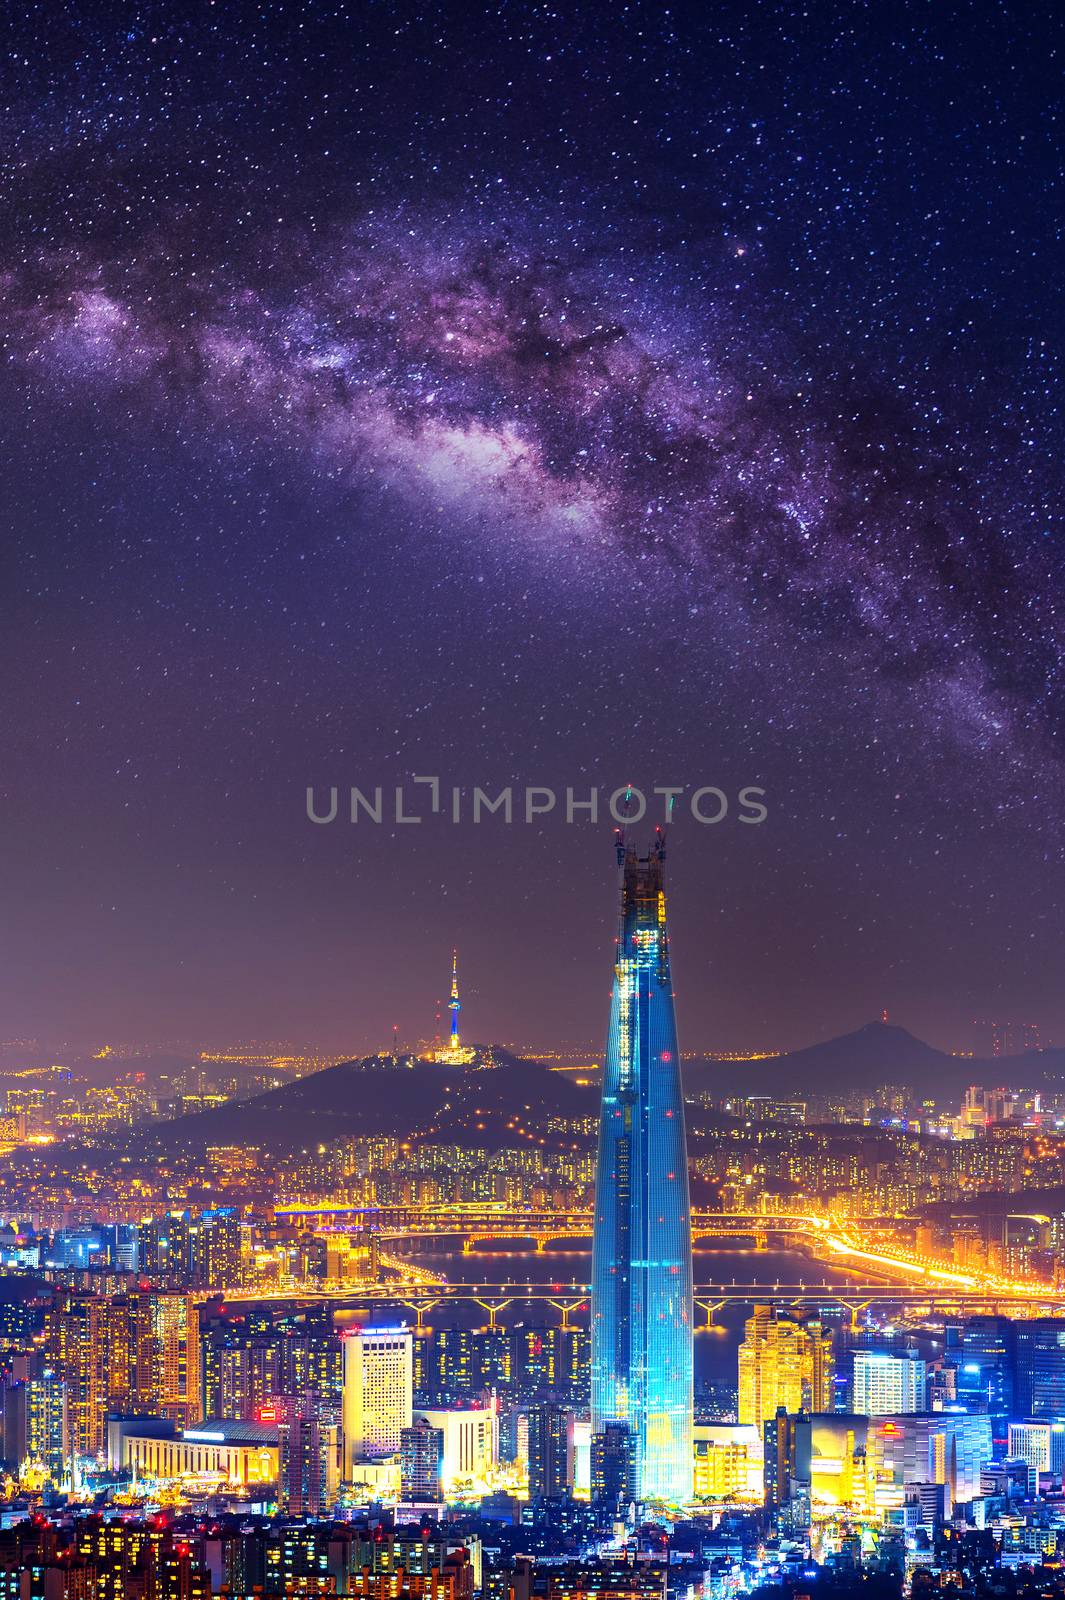 South Korea skyline of Seoul, The best view of South Korea with Lotte world mall and Milky way at Namhansanseong Fortress. by gutarphotoghaphy